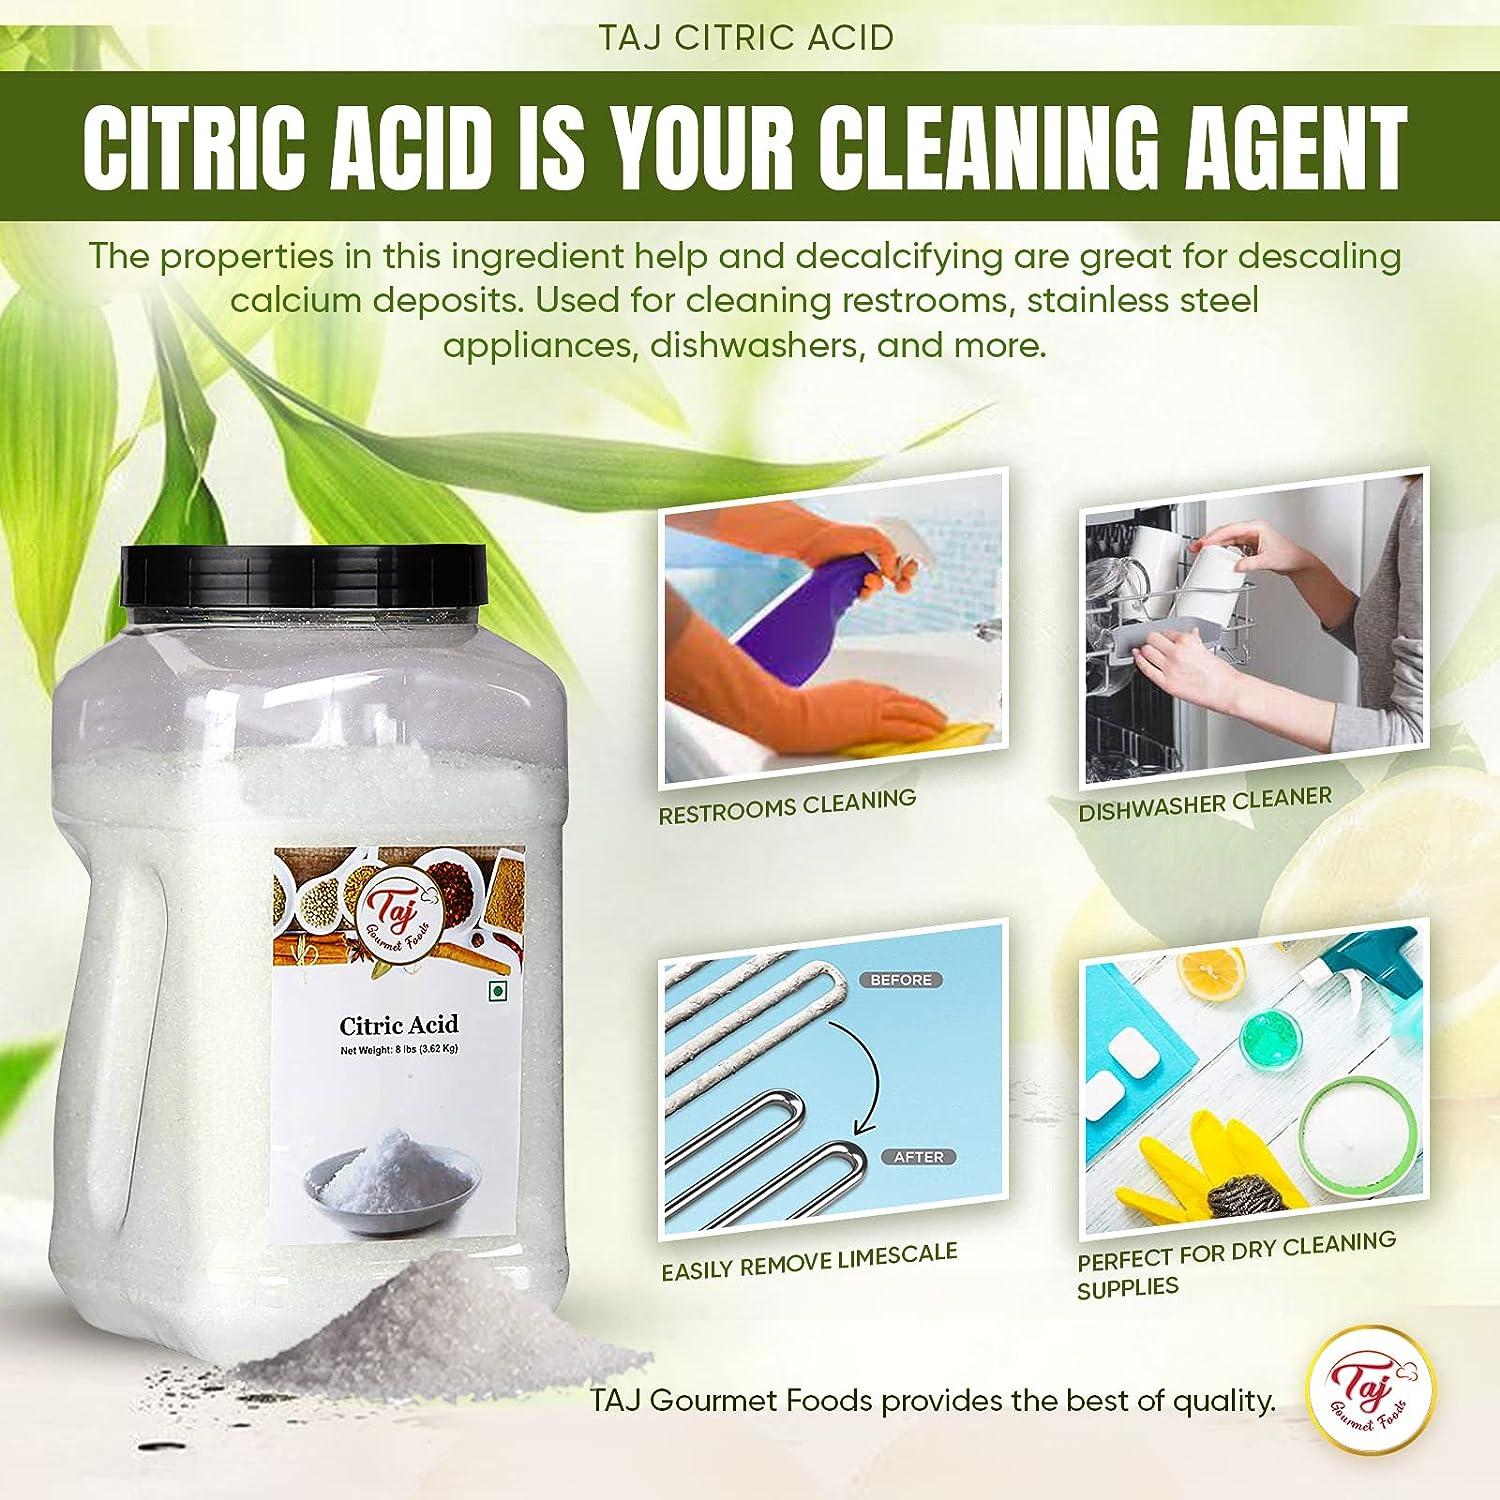 Can Citric Acid Be Used for Cleaning?